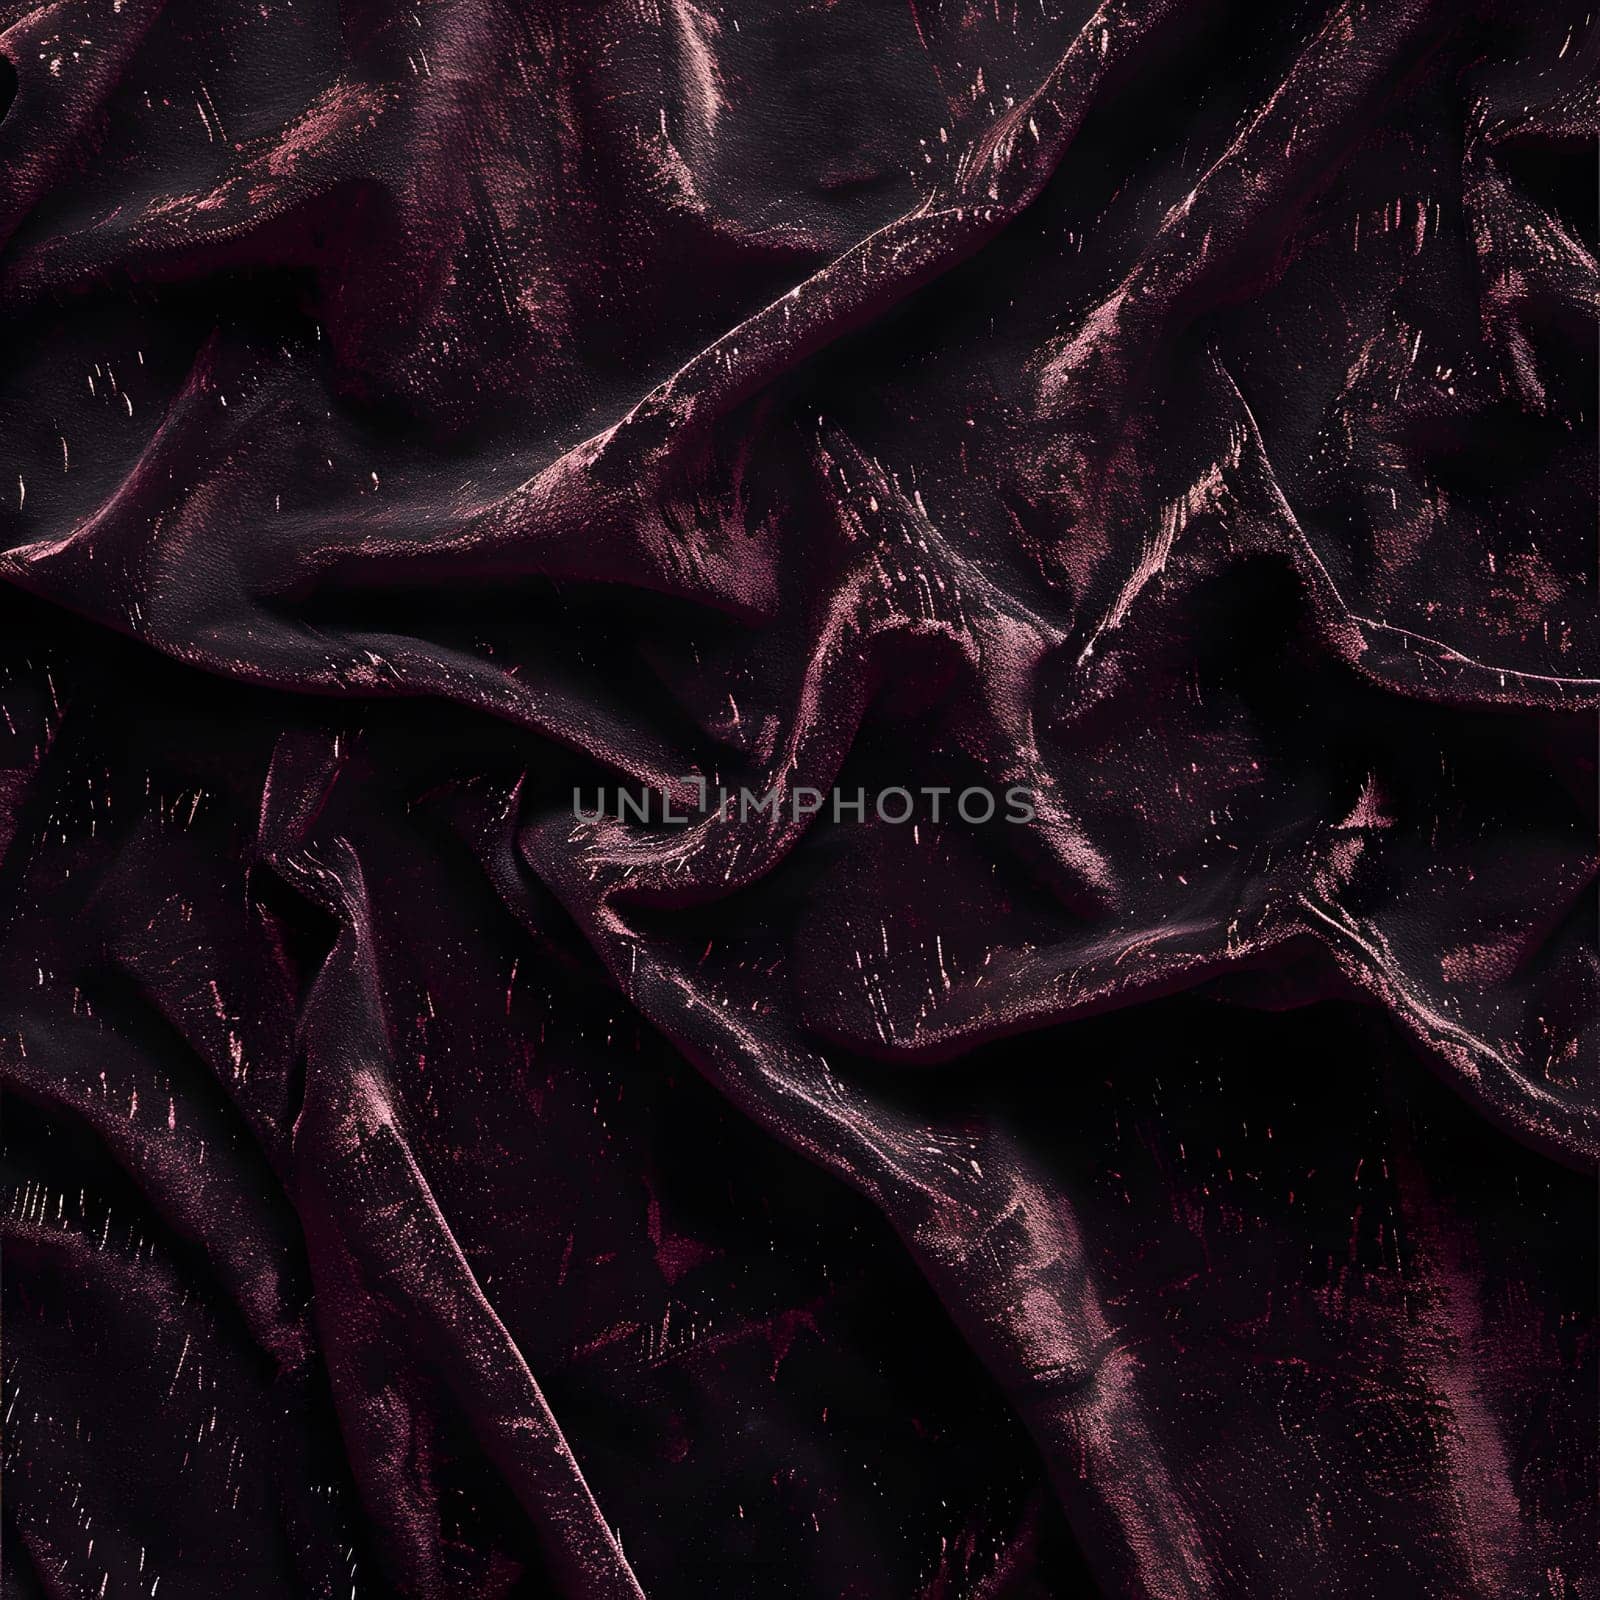 A close up of a dark purple velvet fabric resembling the color of a magenta twilight. The texture is smooth like plant leaves, with hints of electric blue and metallic sheen